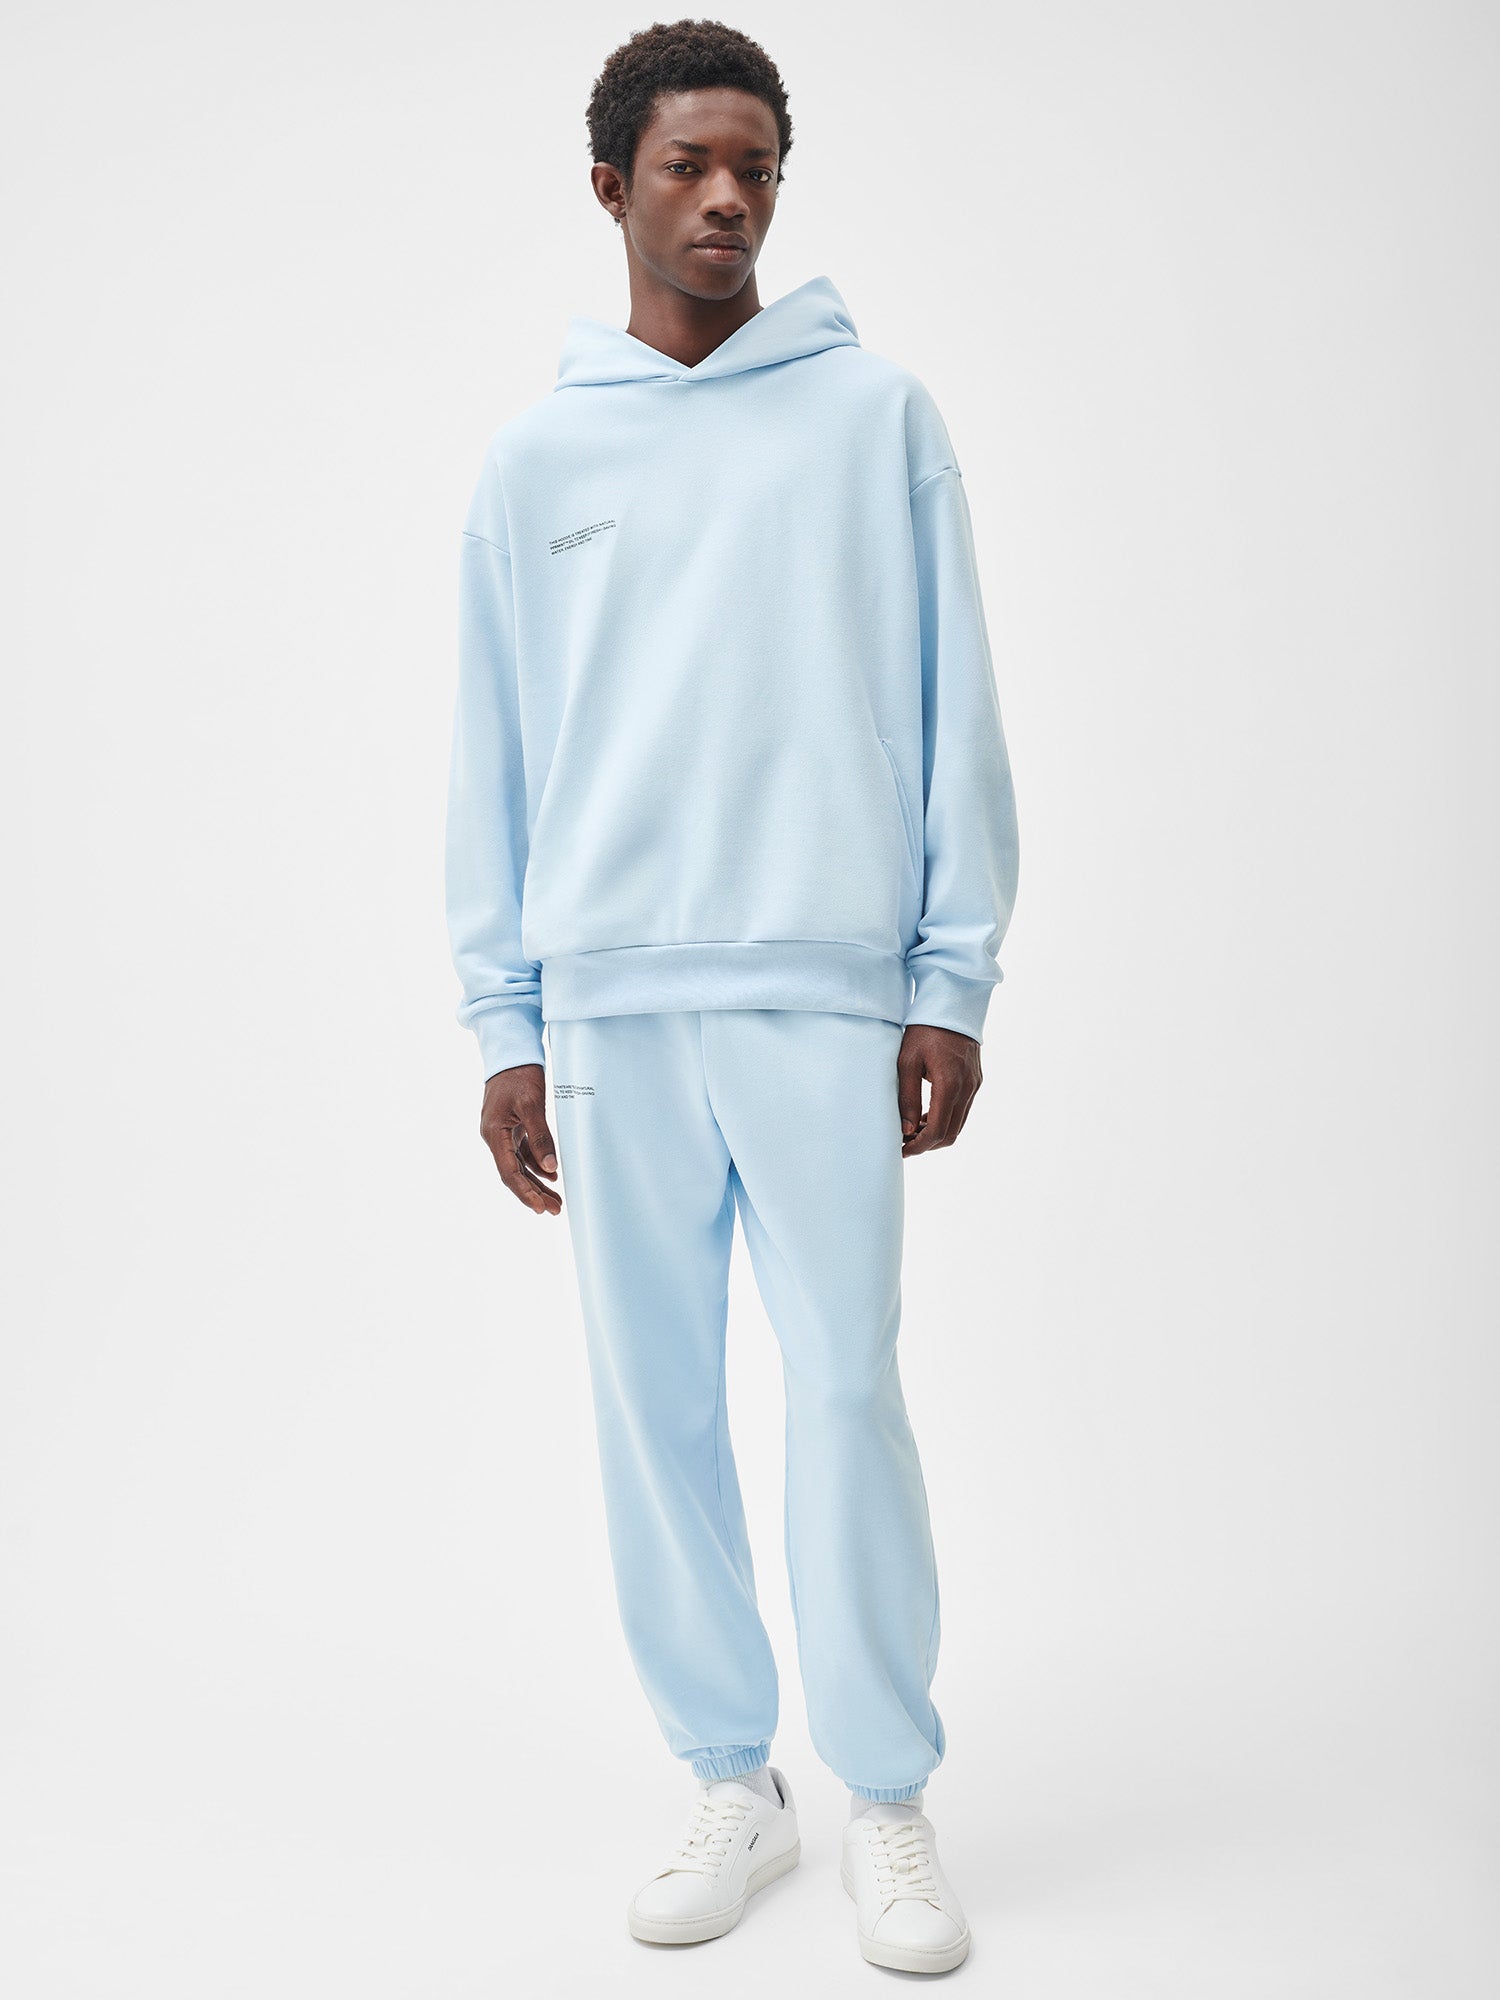 365-Trackpants-Baby-Blue-Model-Male-1